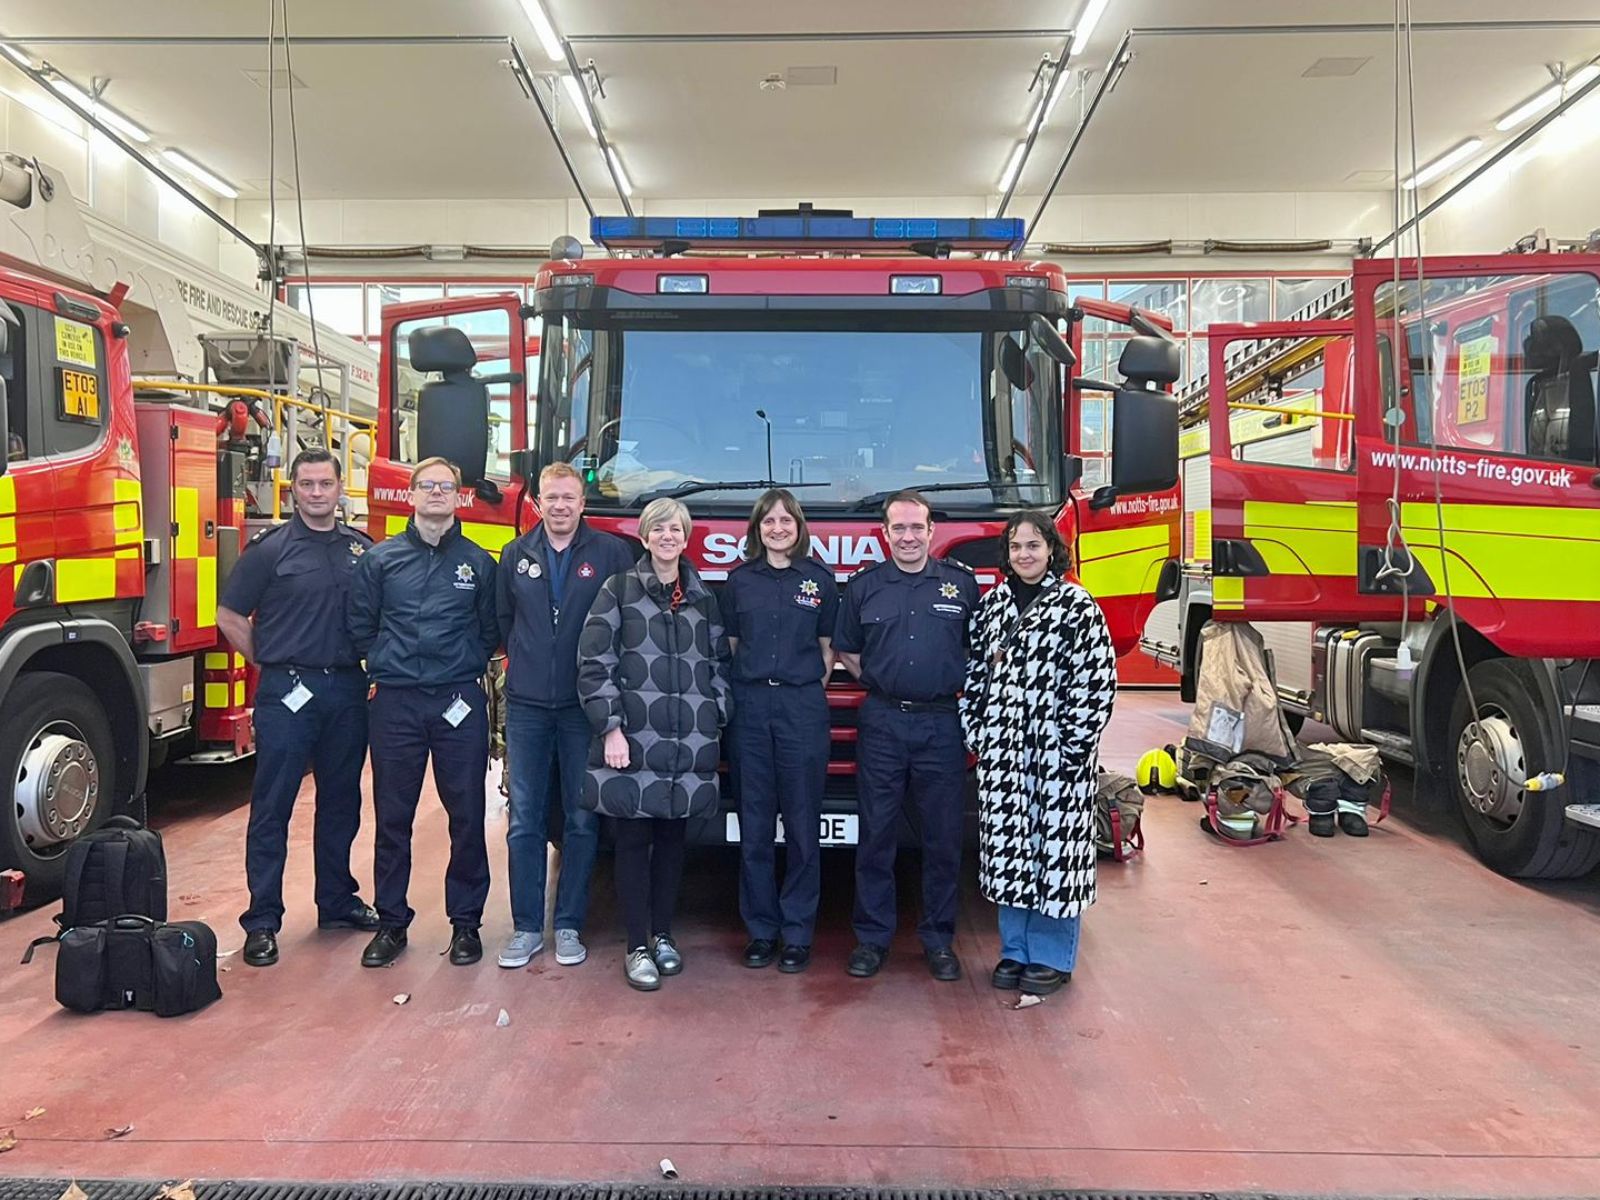 Nadia Whittome and Lilian Greenwood with Fire Brigades Union members in front of a fire engine.